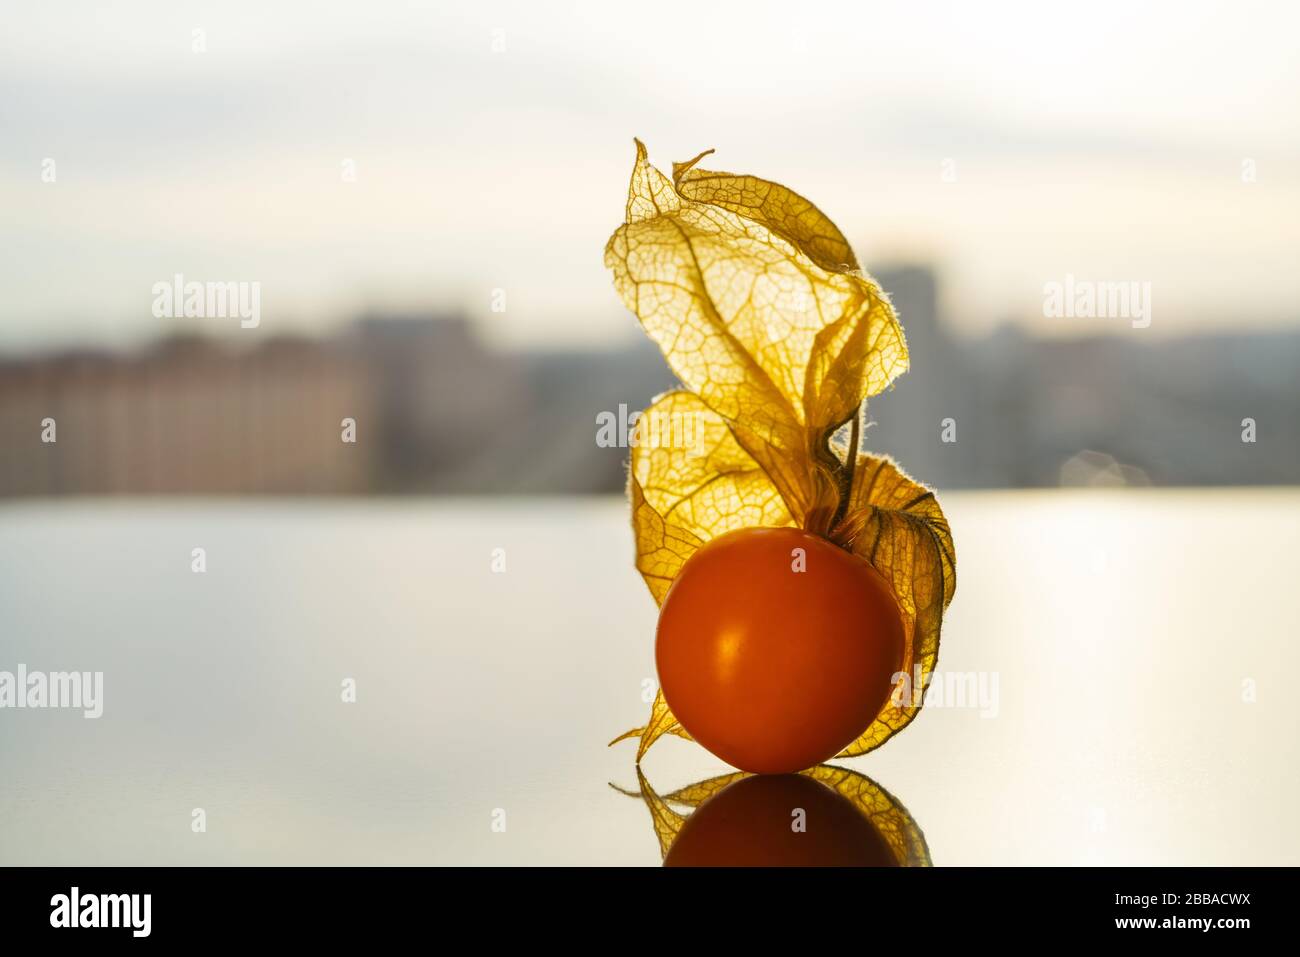 Physalis peruviana, Cape gooseberry, goldenberry on a reflective surface against the background of the city. Stock Photo